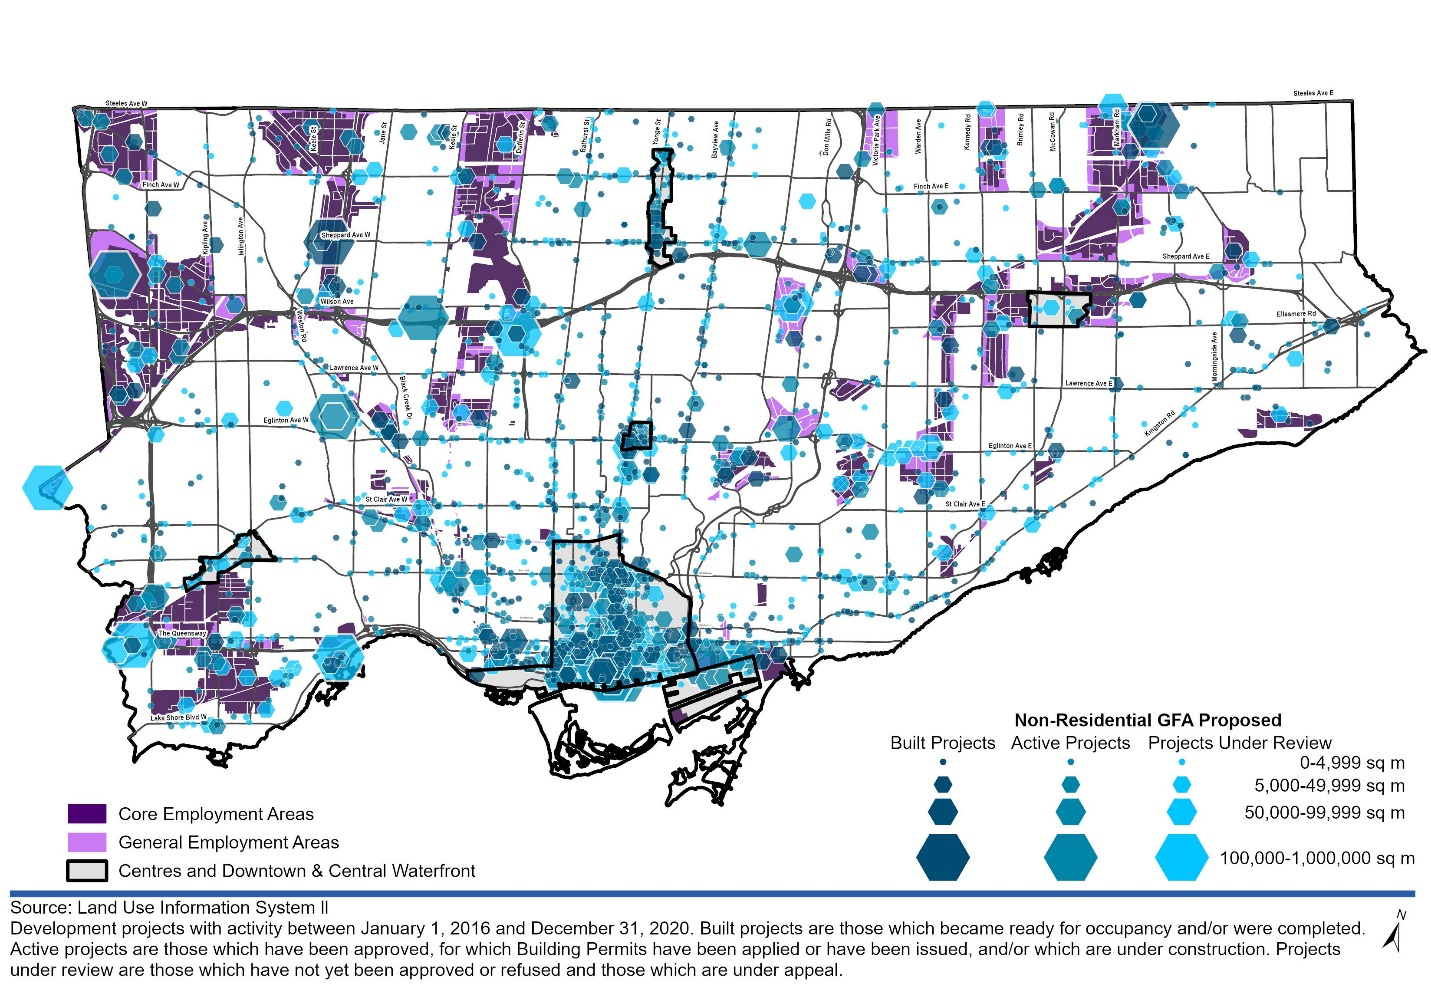 This map shows non-residential projects as graduated hexagons with their size based on the amount of non-residential GFA they propose. For more information, contact Hailey Toft at 416-392-9787 or hailey.toft@toronto.ca.